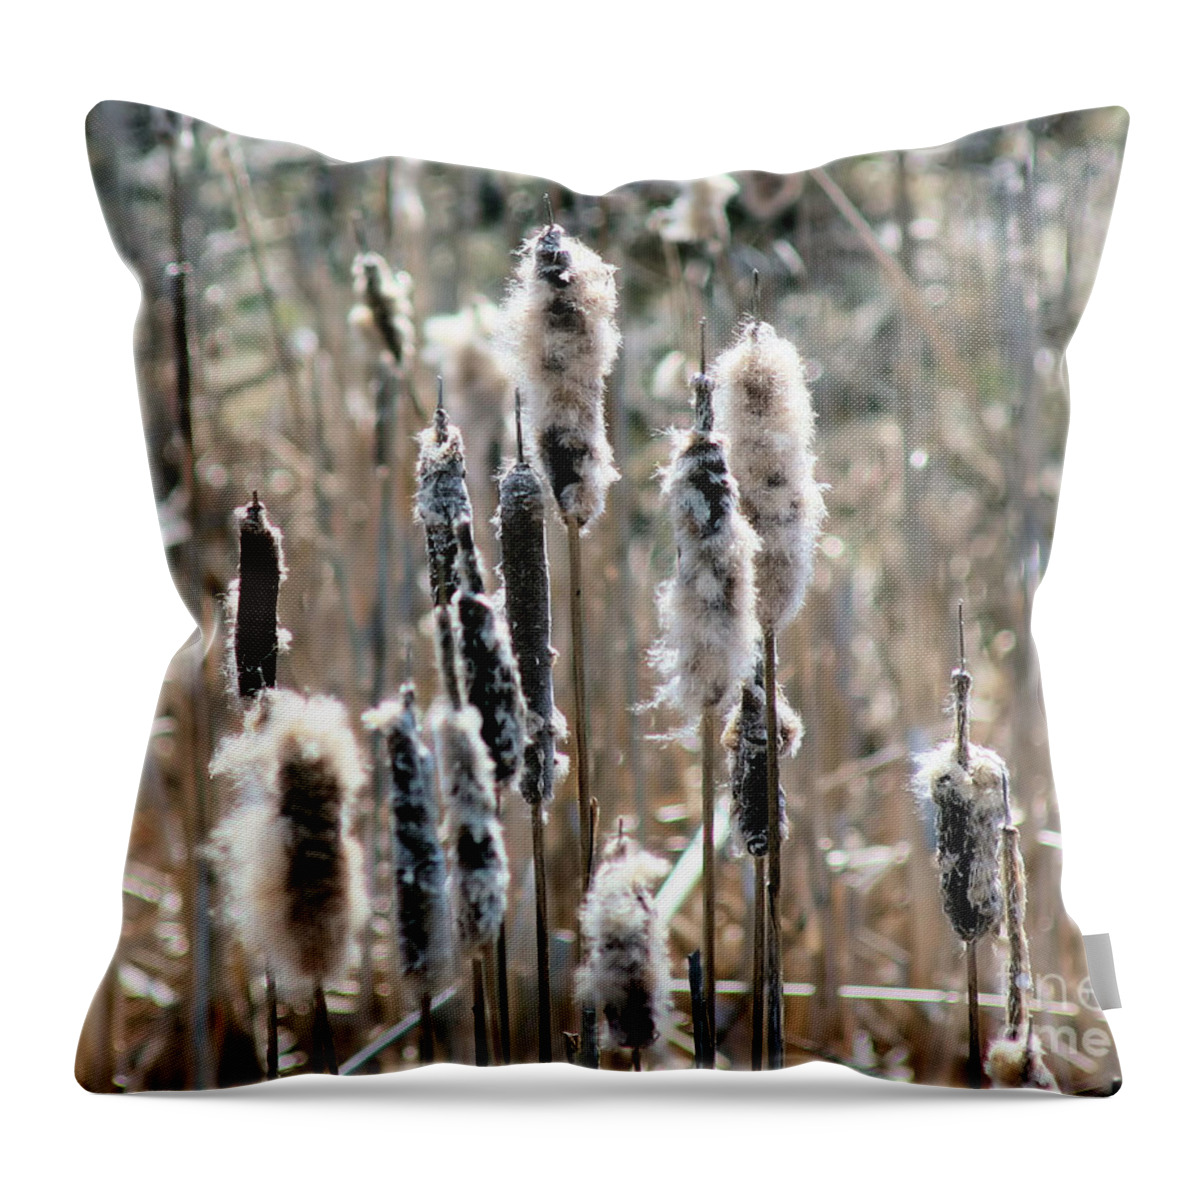 Cattails Throw Pillow featuring the photograph Fluffy Cattails by Smilin Eyes Treasures